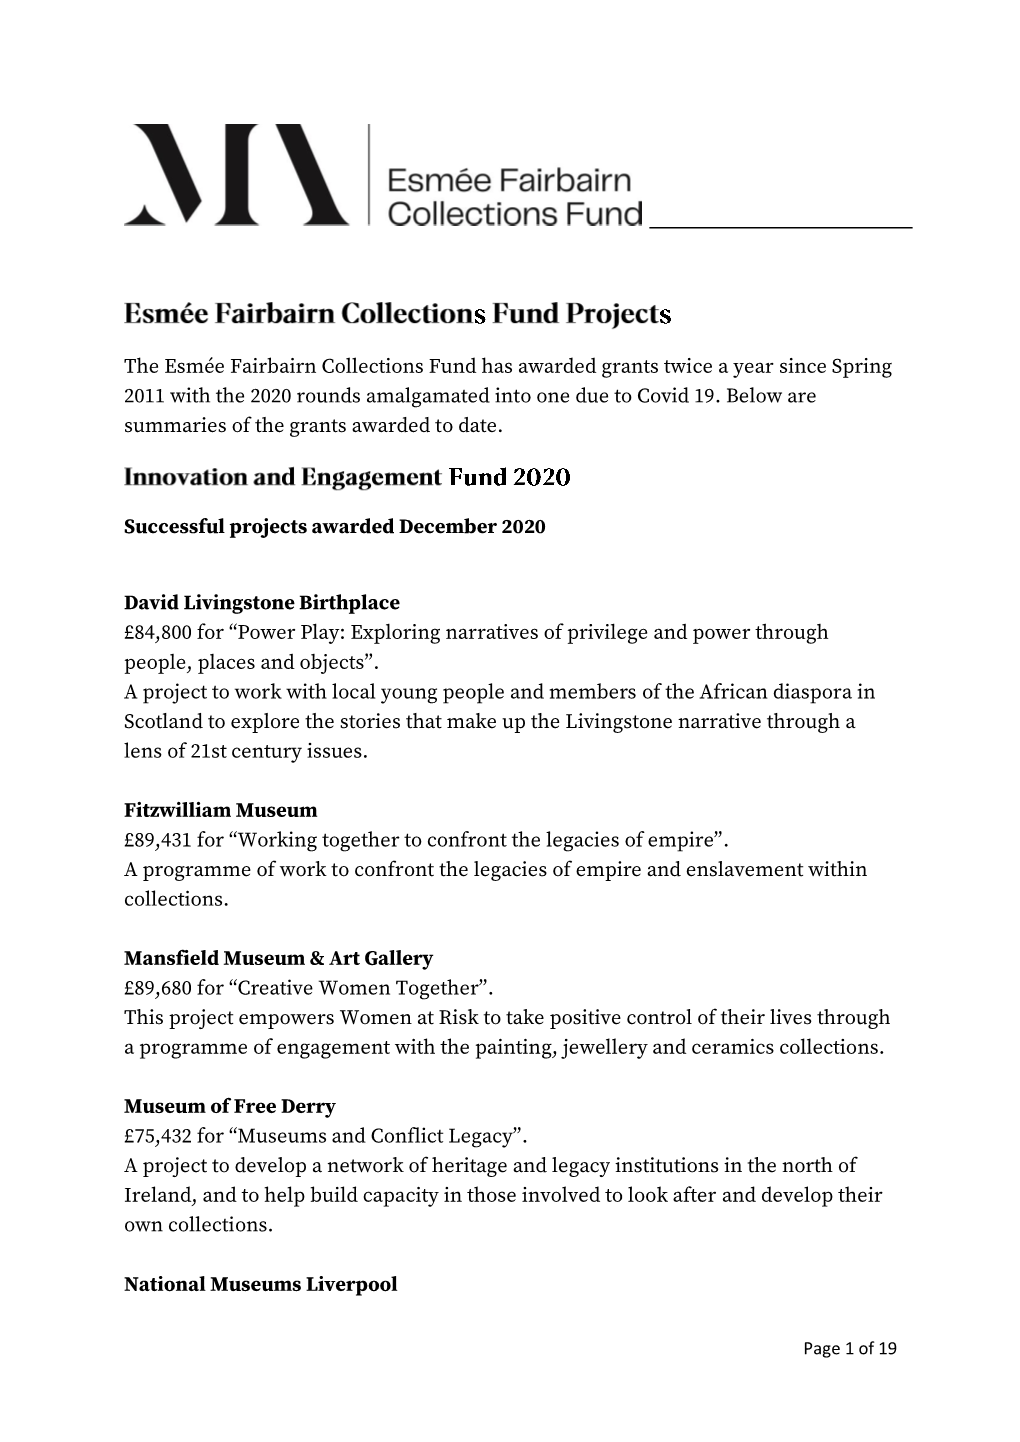 The Esmée Fairbairn Collections Fund Has Awarded Grants Twice a Year Since Spring 2011 with the 2020 Rounds Amalgamated Into One Due to Covid 19